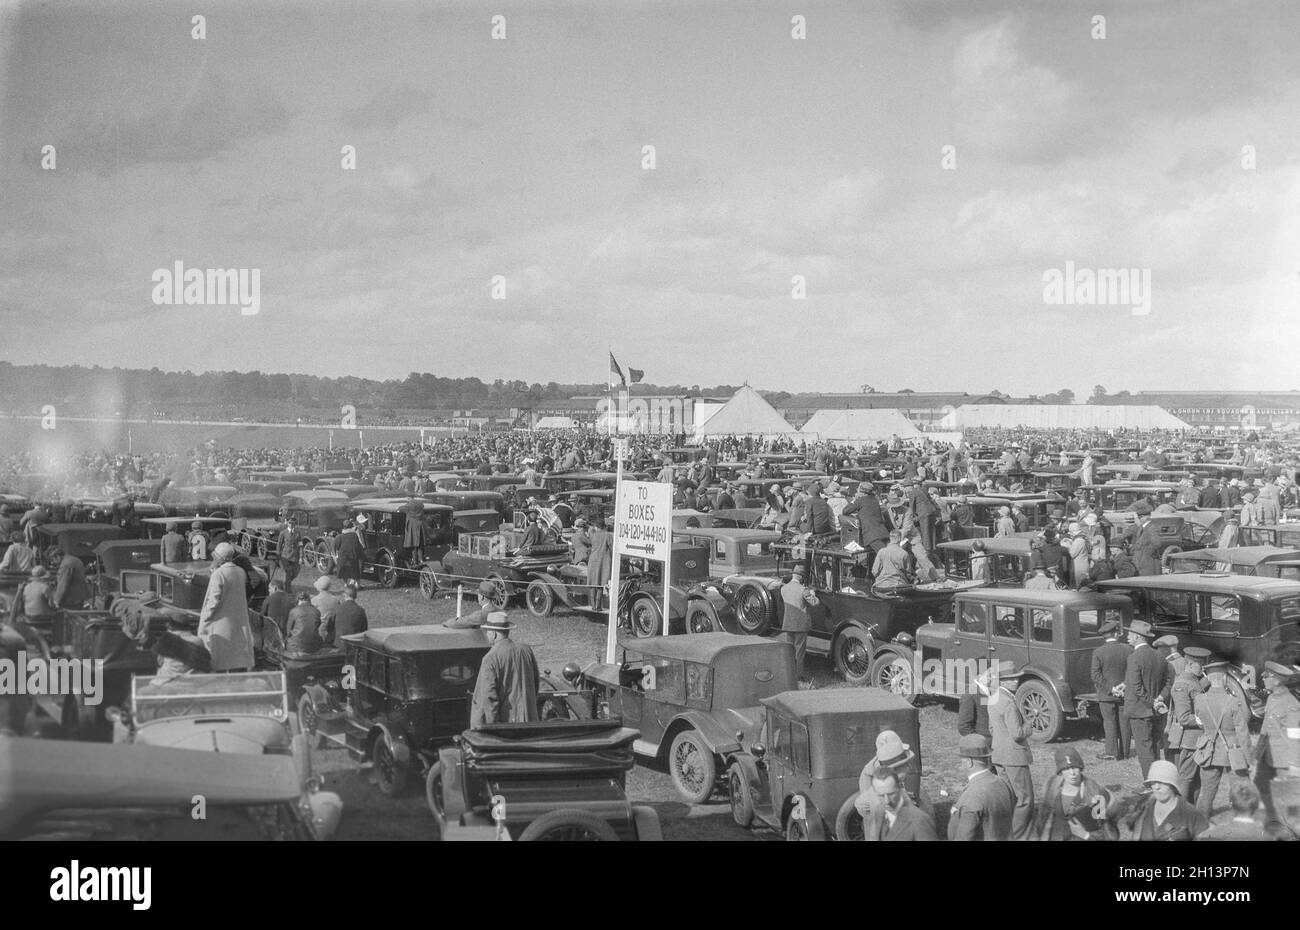 A vintage 1925 black and white photograph showing an air display at RAF Northolt near London, England. A large crowd watches the display. Stock Photo